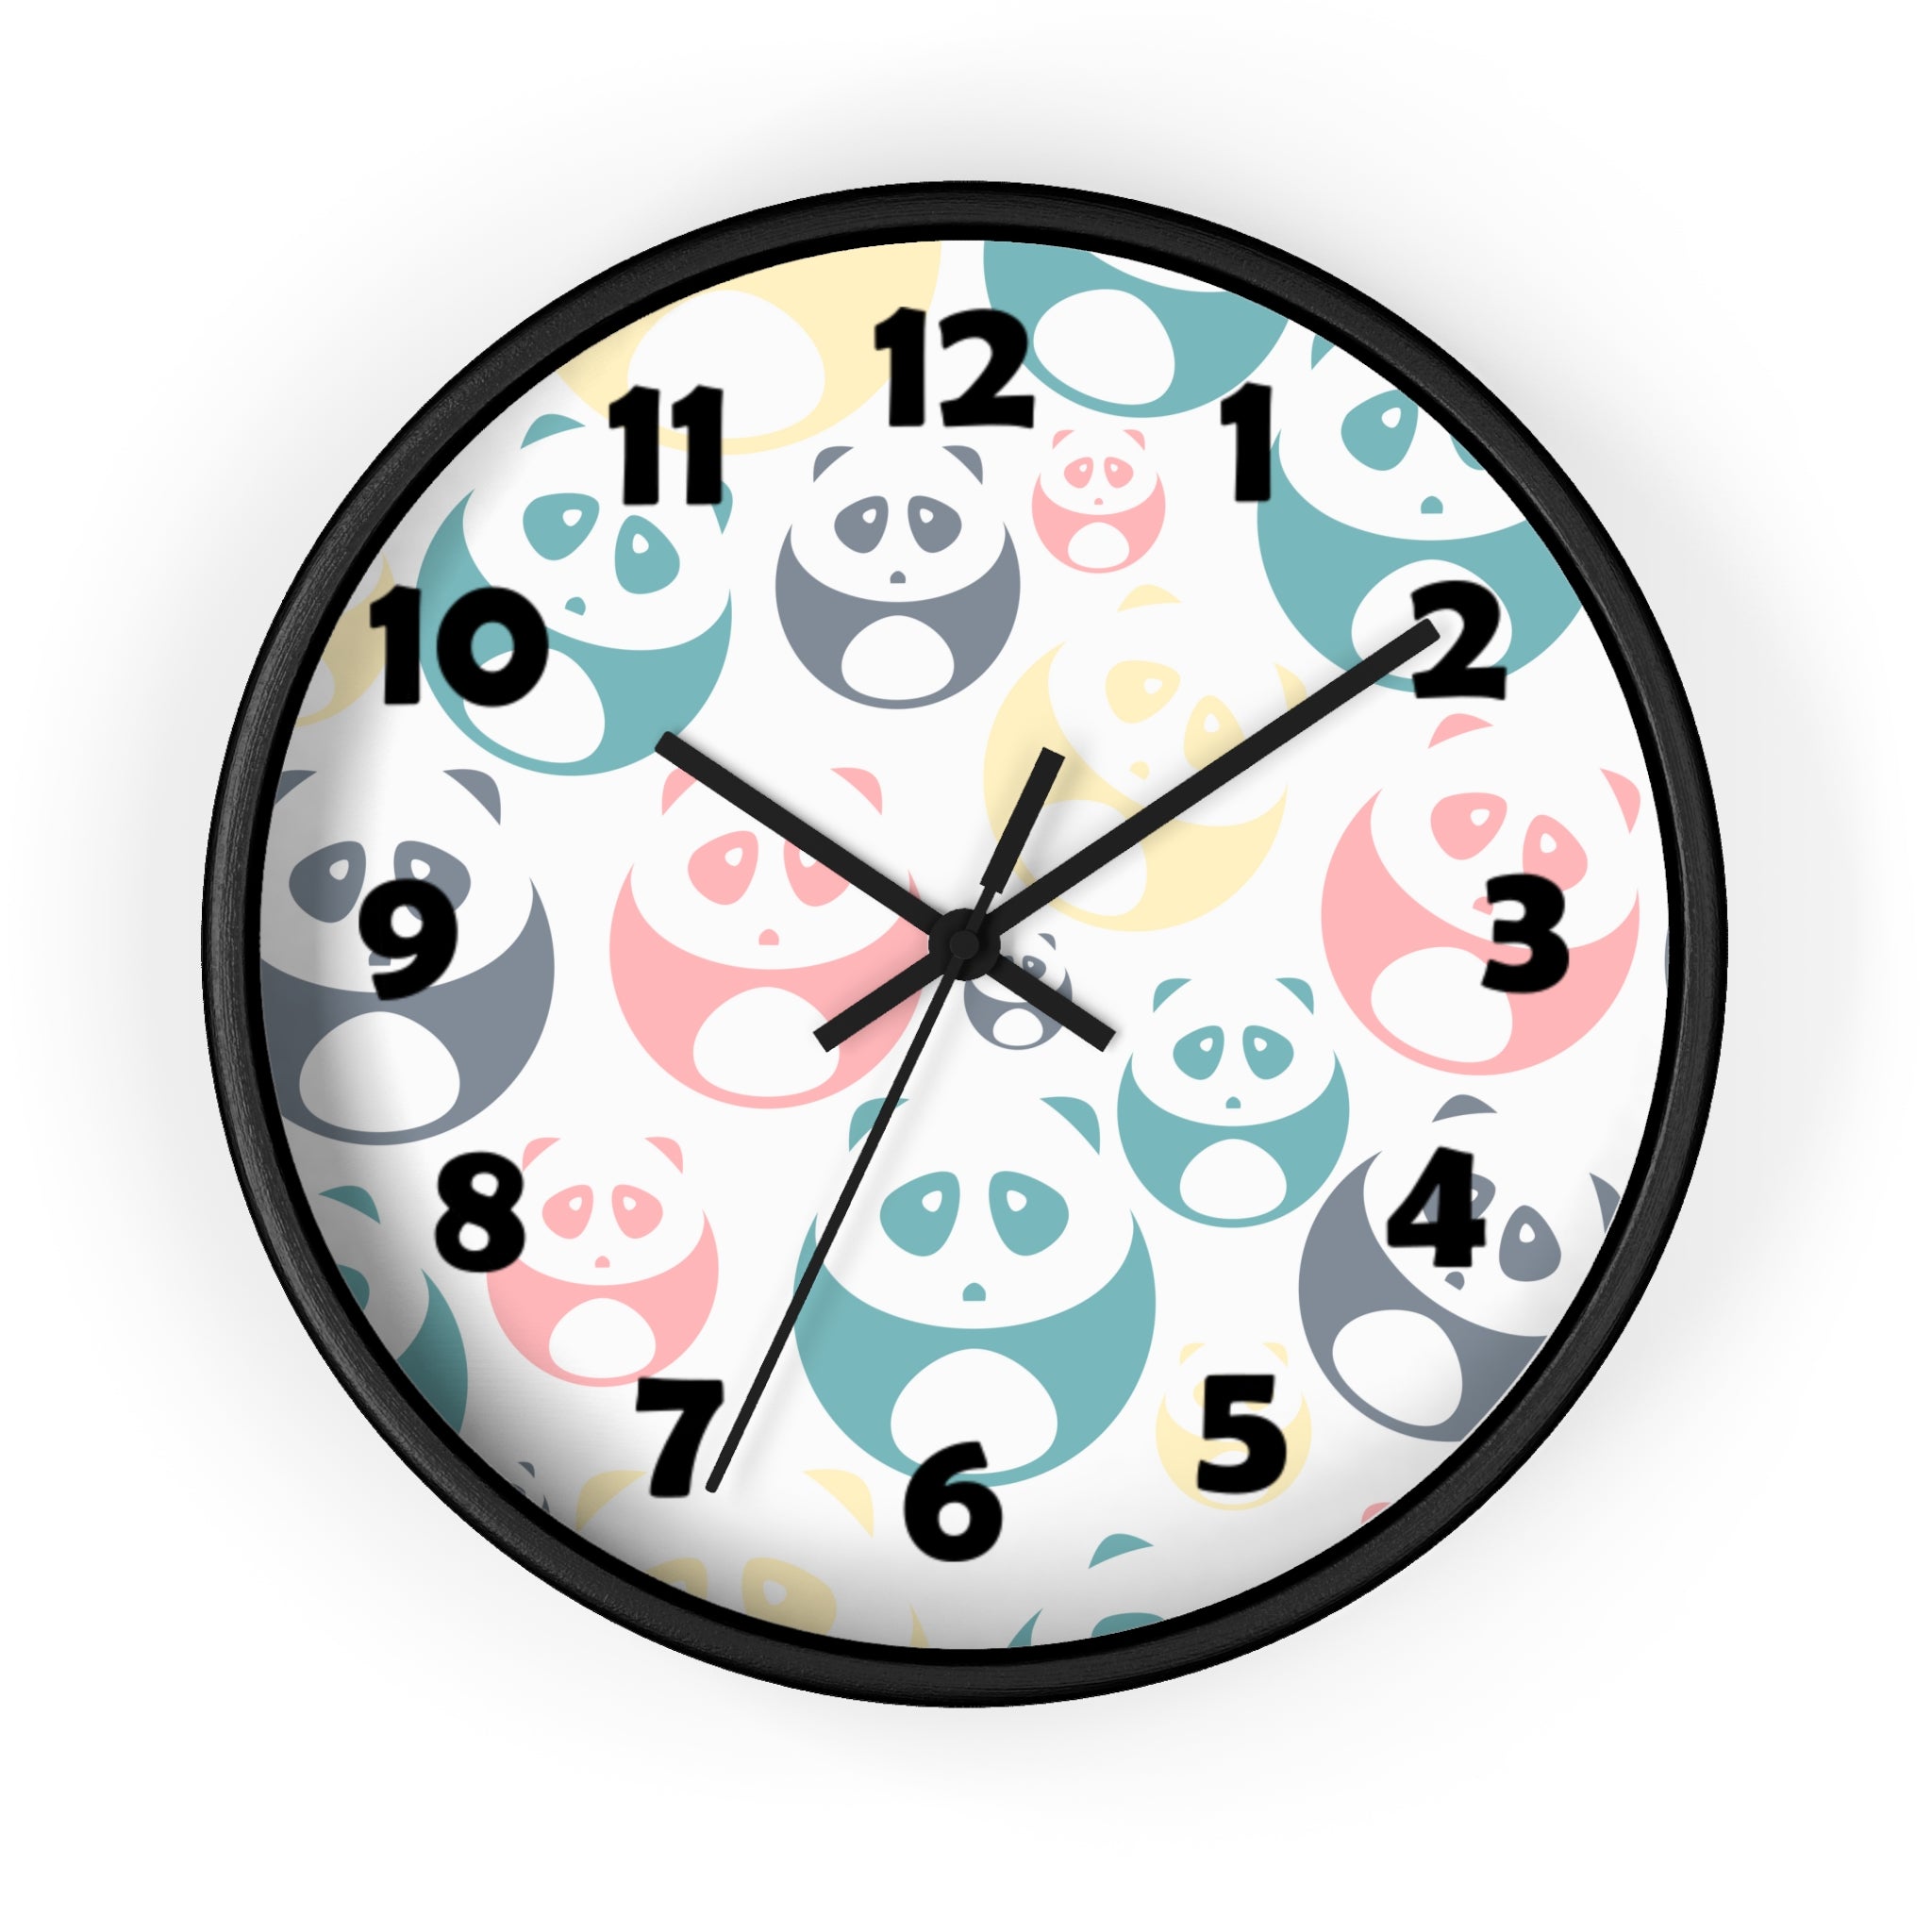 10 inch wall clock with colorful panda pattern